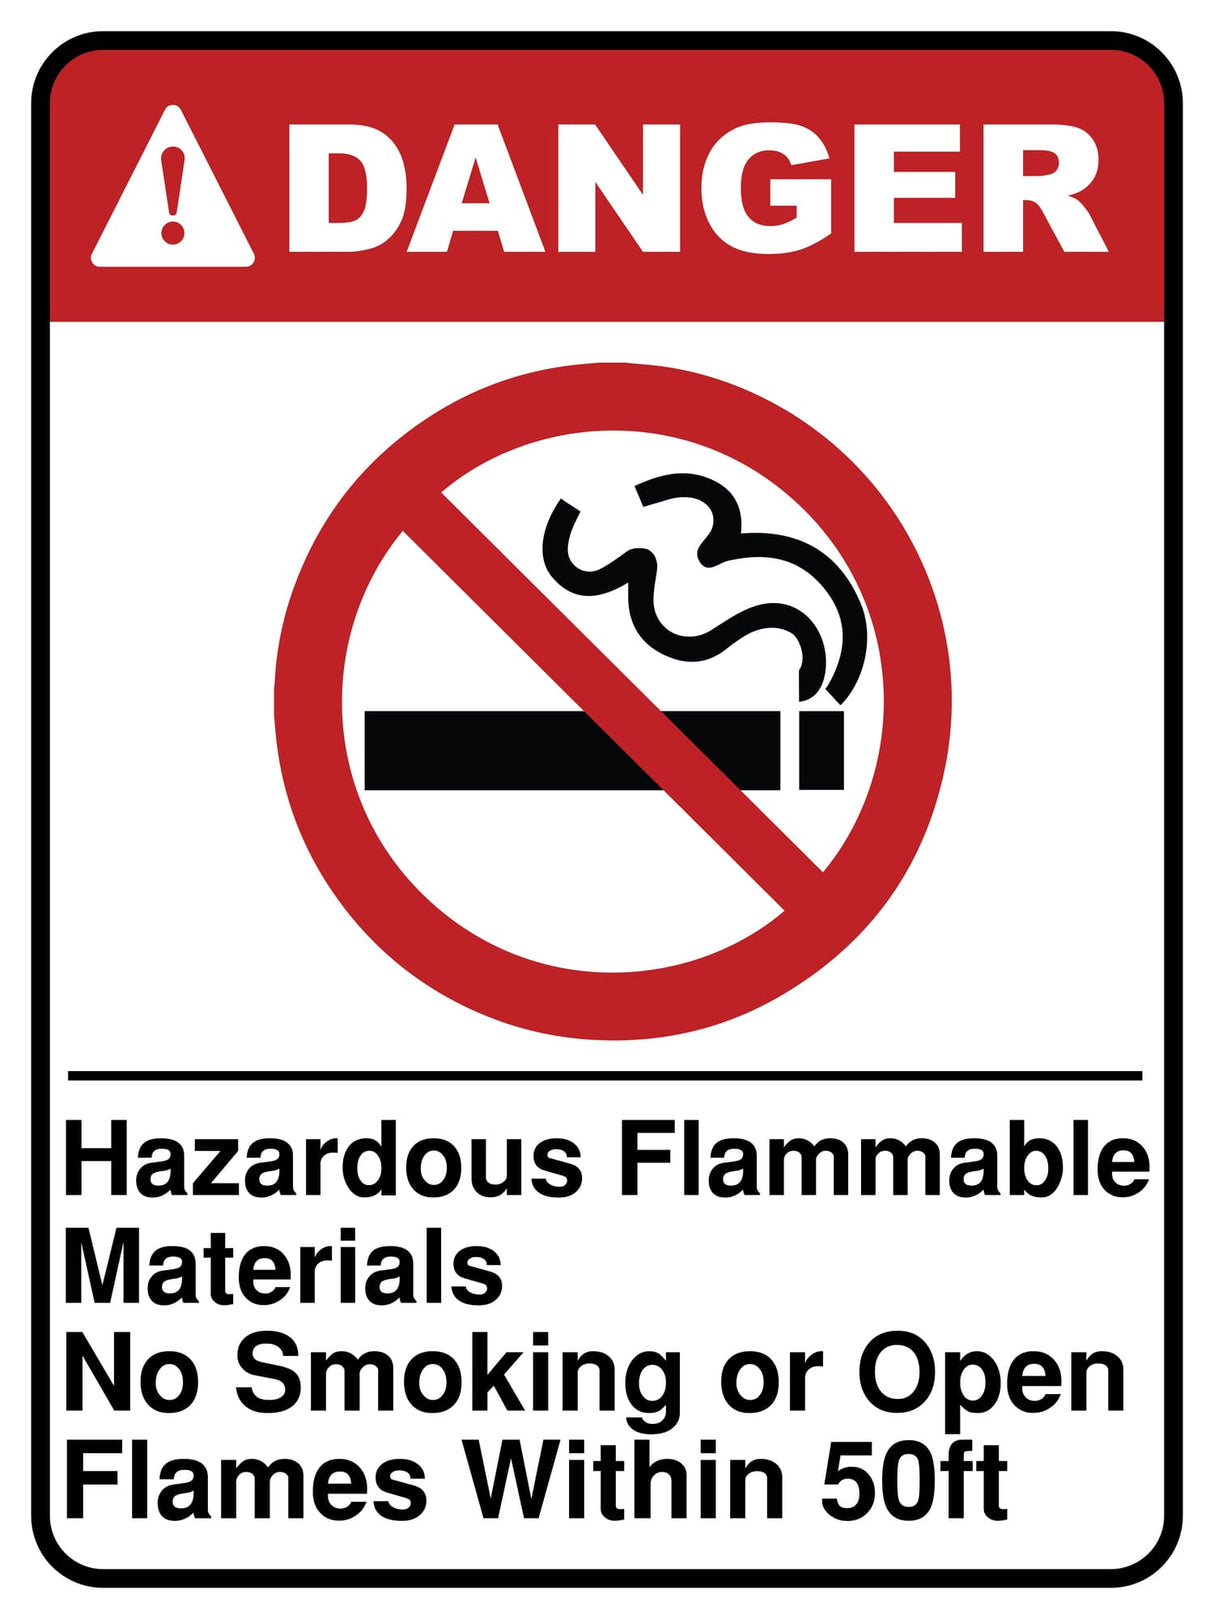 Hazardous Flammable Materials No Smoking Or Open Flames Within 50Ft